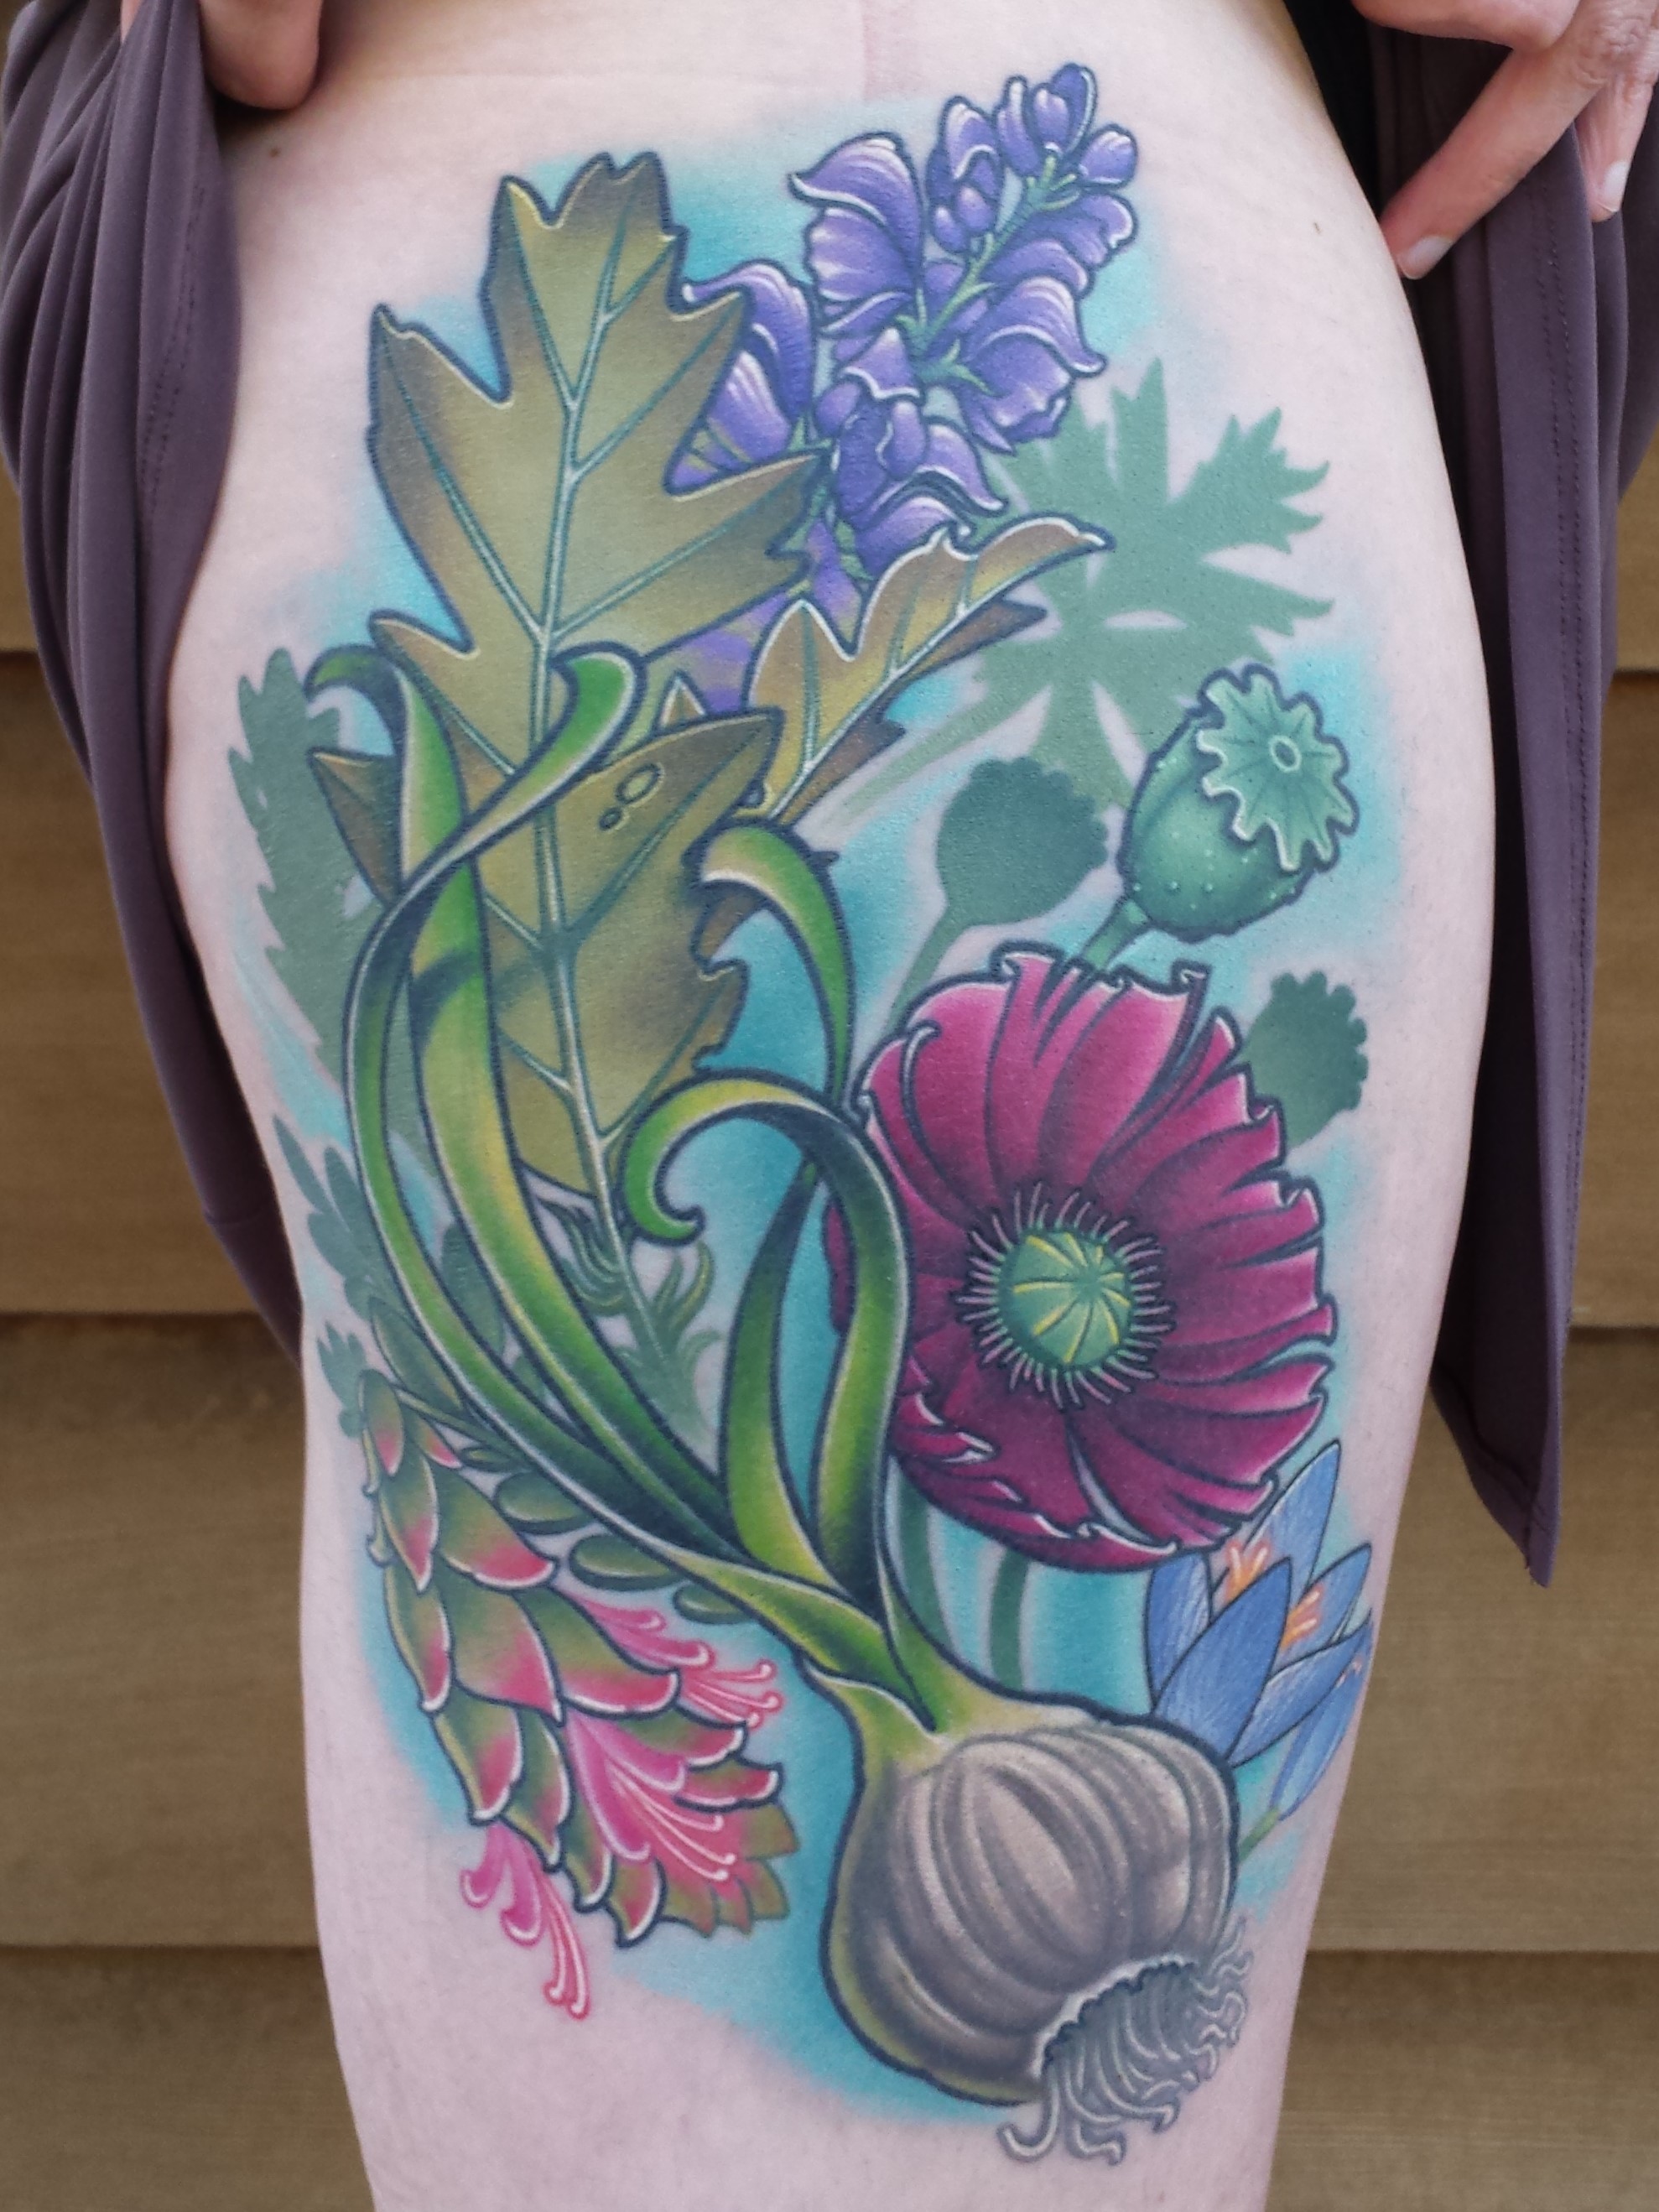 Flowers and Garlic thigh tattoo by Cracker Joe Swider out of CT